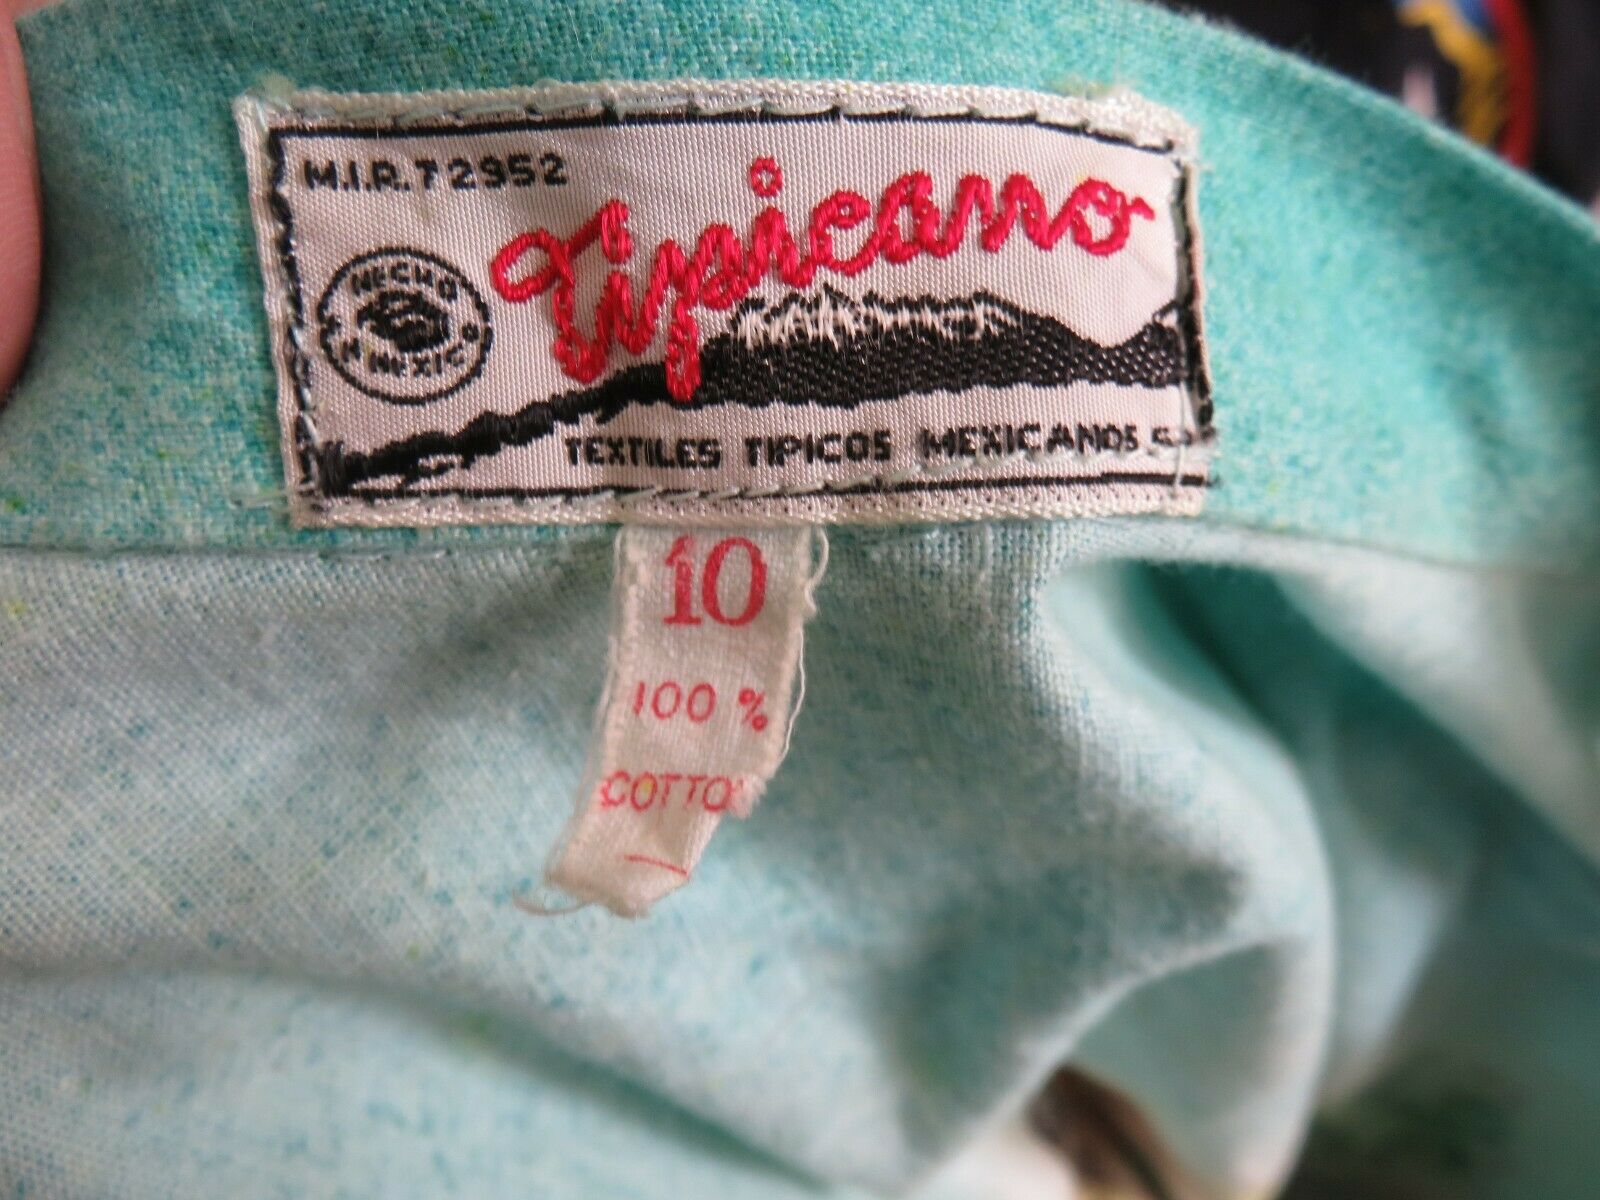 VINTAGE 50's CHLD'S TIPICANO MEXICAN CIRCLE SKIRT HAND PAINTED SZ 10